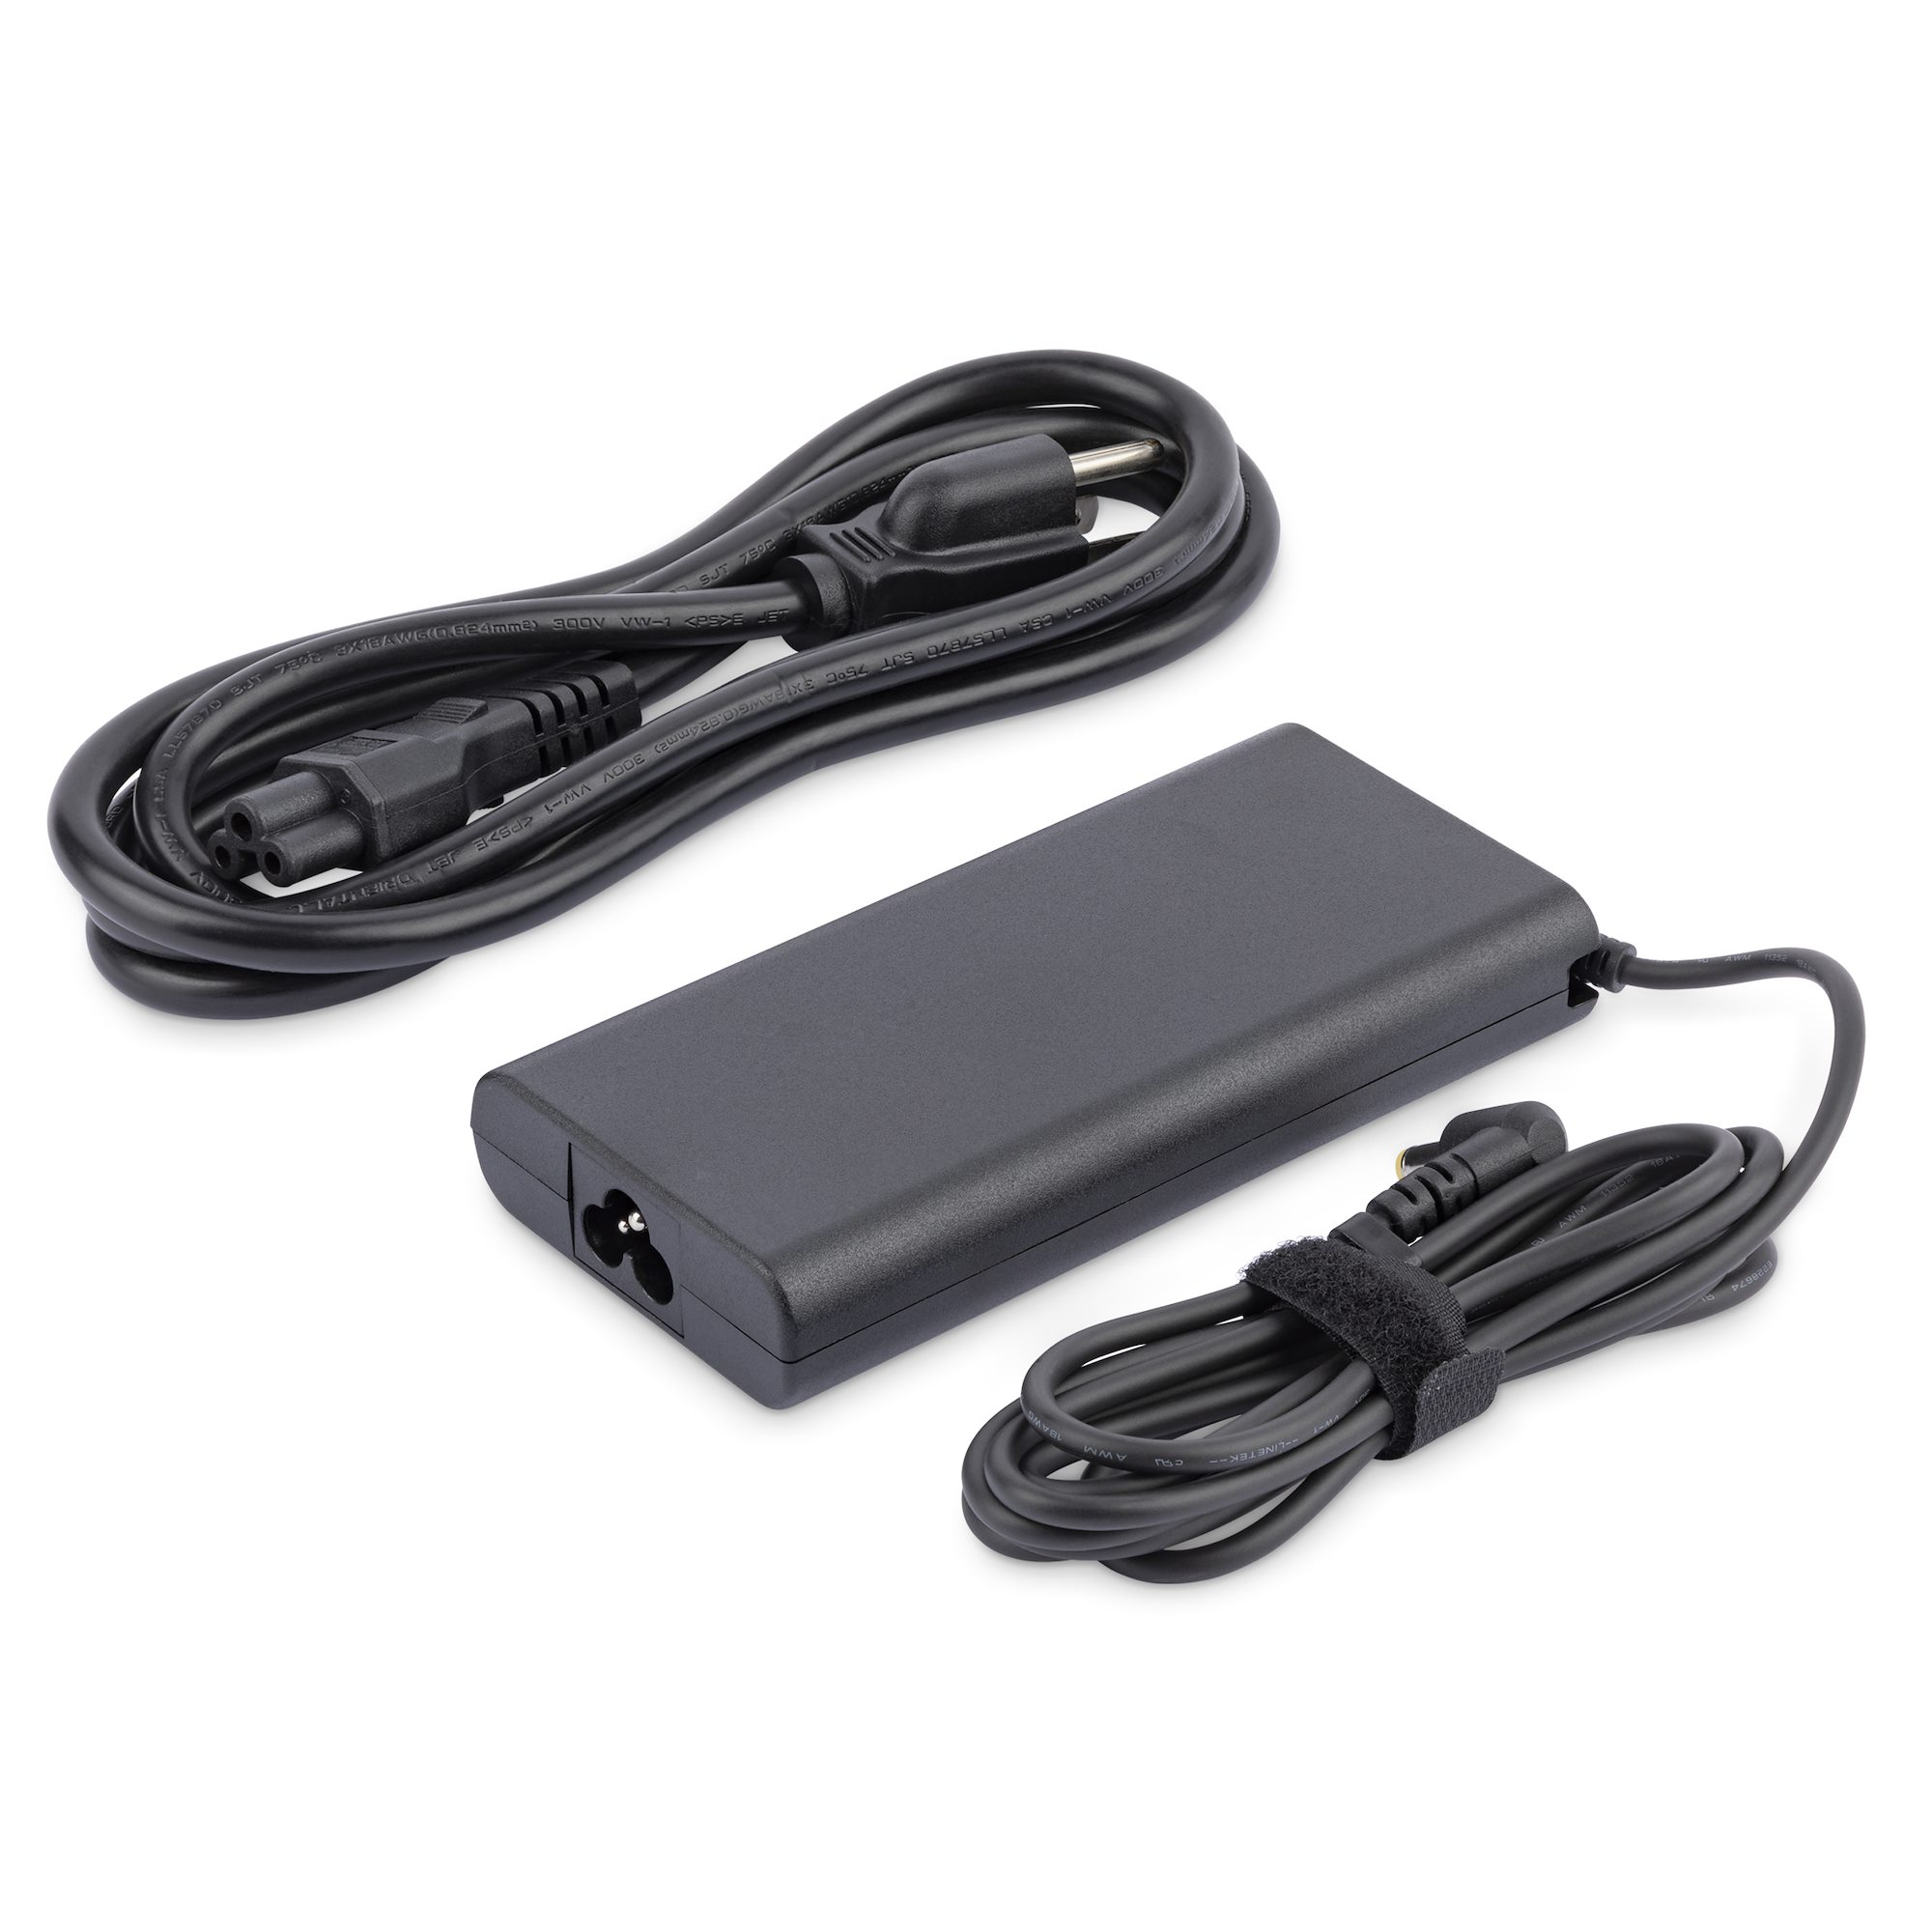 Universal DC 5V 2A 2.5mm AC Power Charger for Tablet PC EU Plug